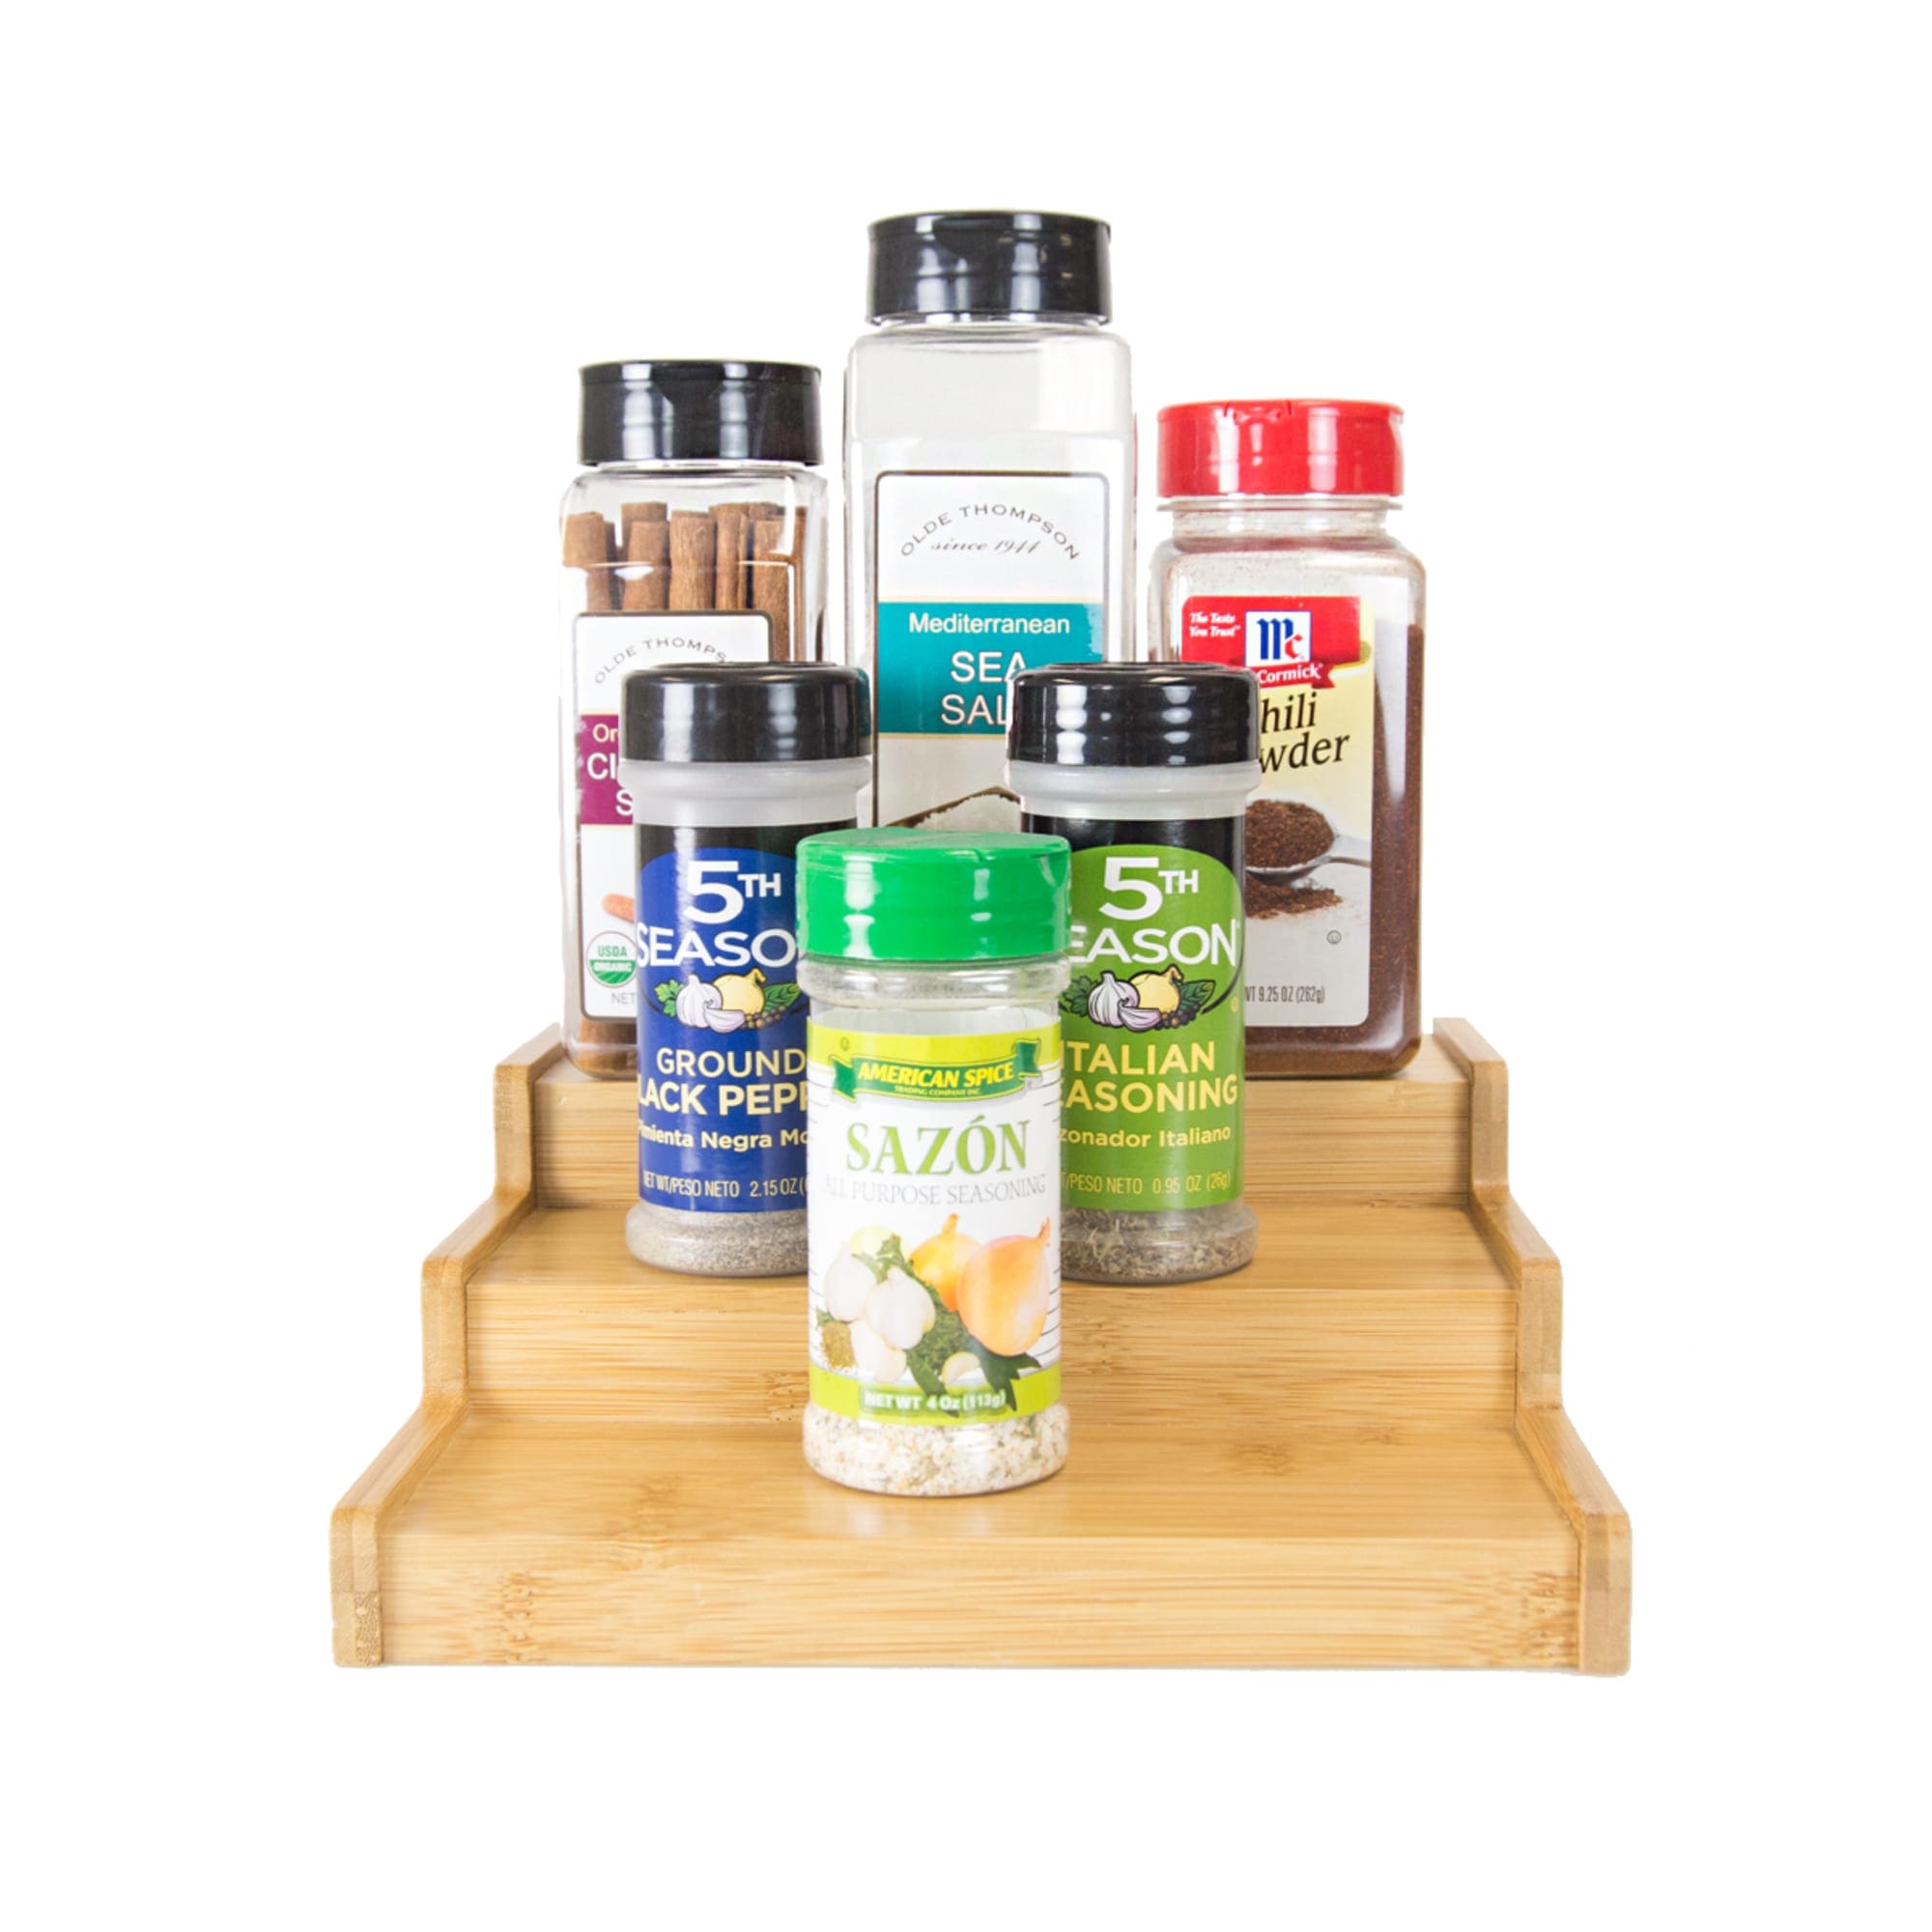 Home Basics 3 Tier Bamboo Spice Rack, Natural $6.00 EACH, CASE PACK OF 12